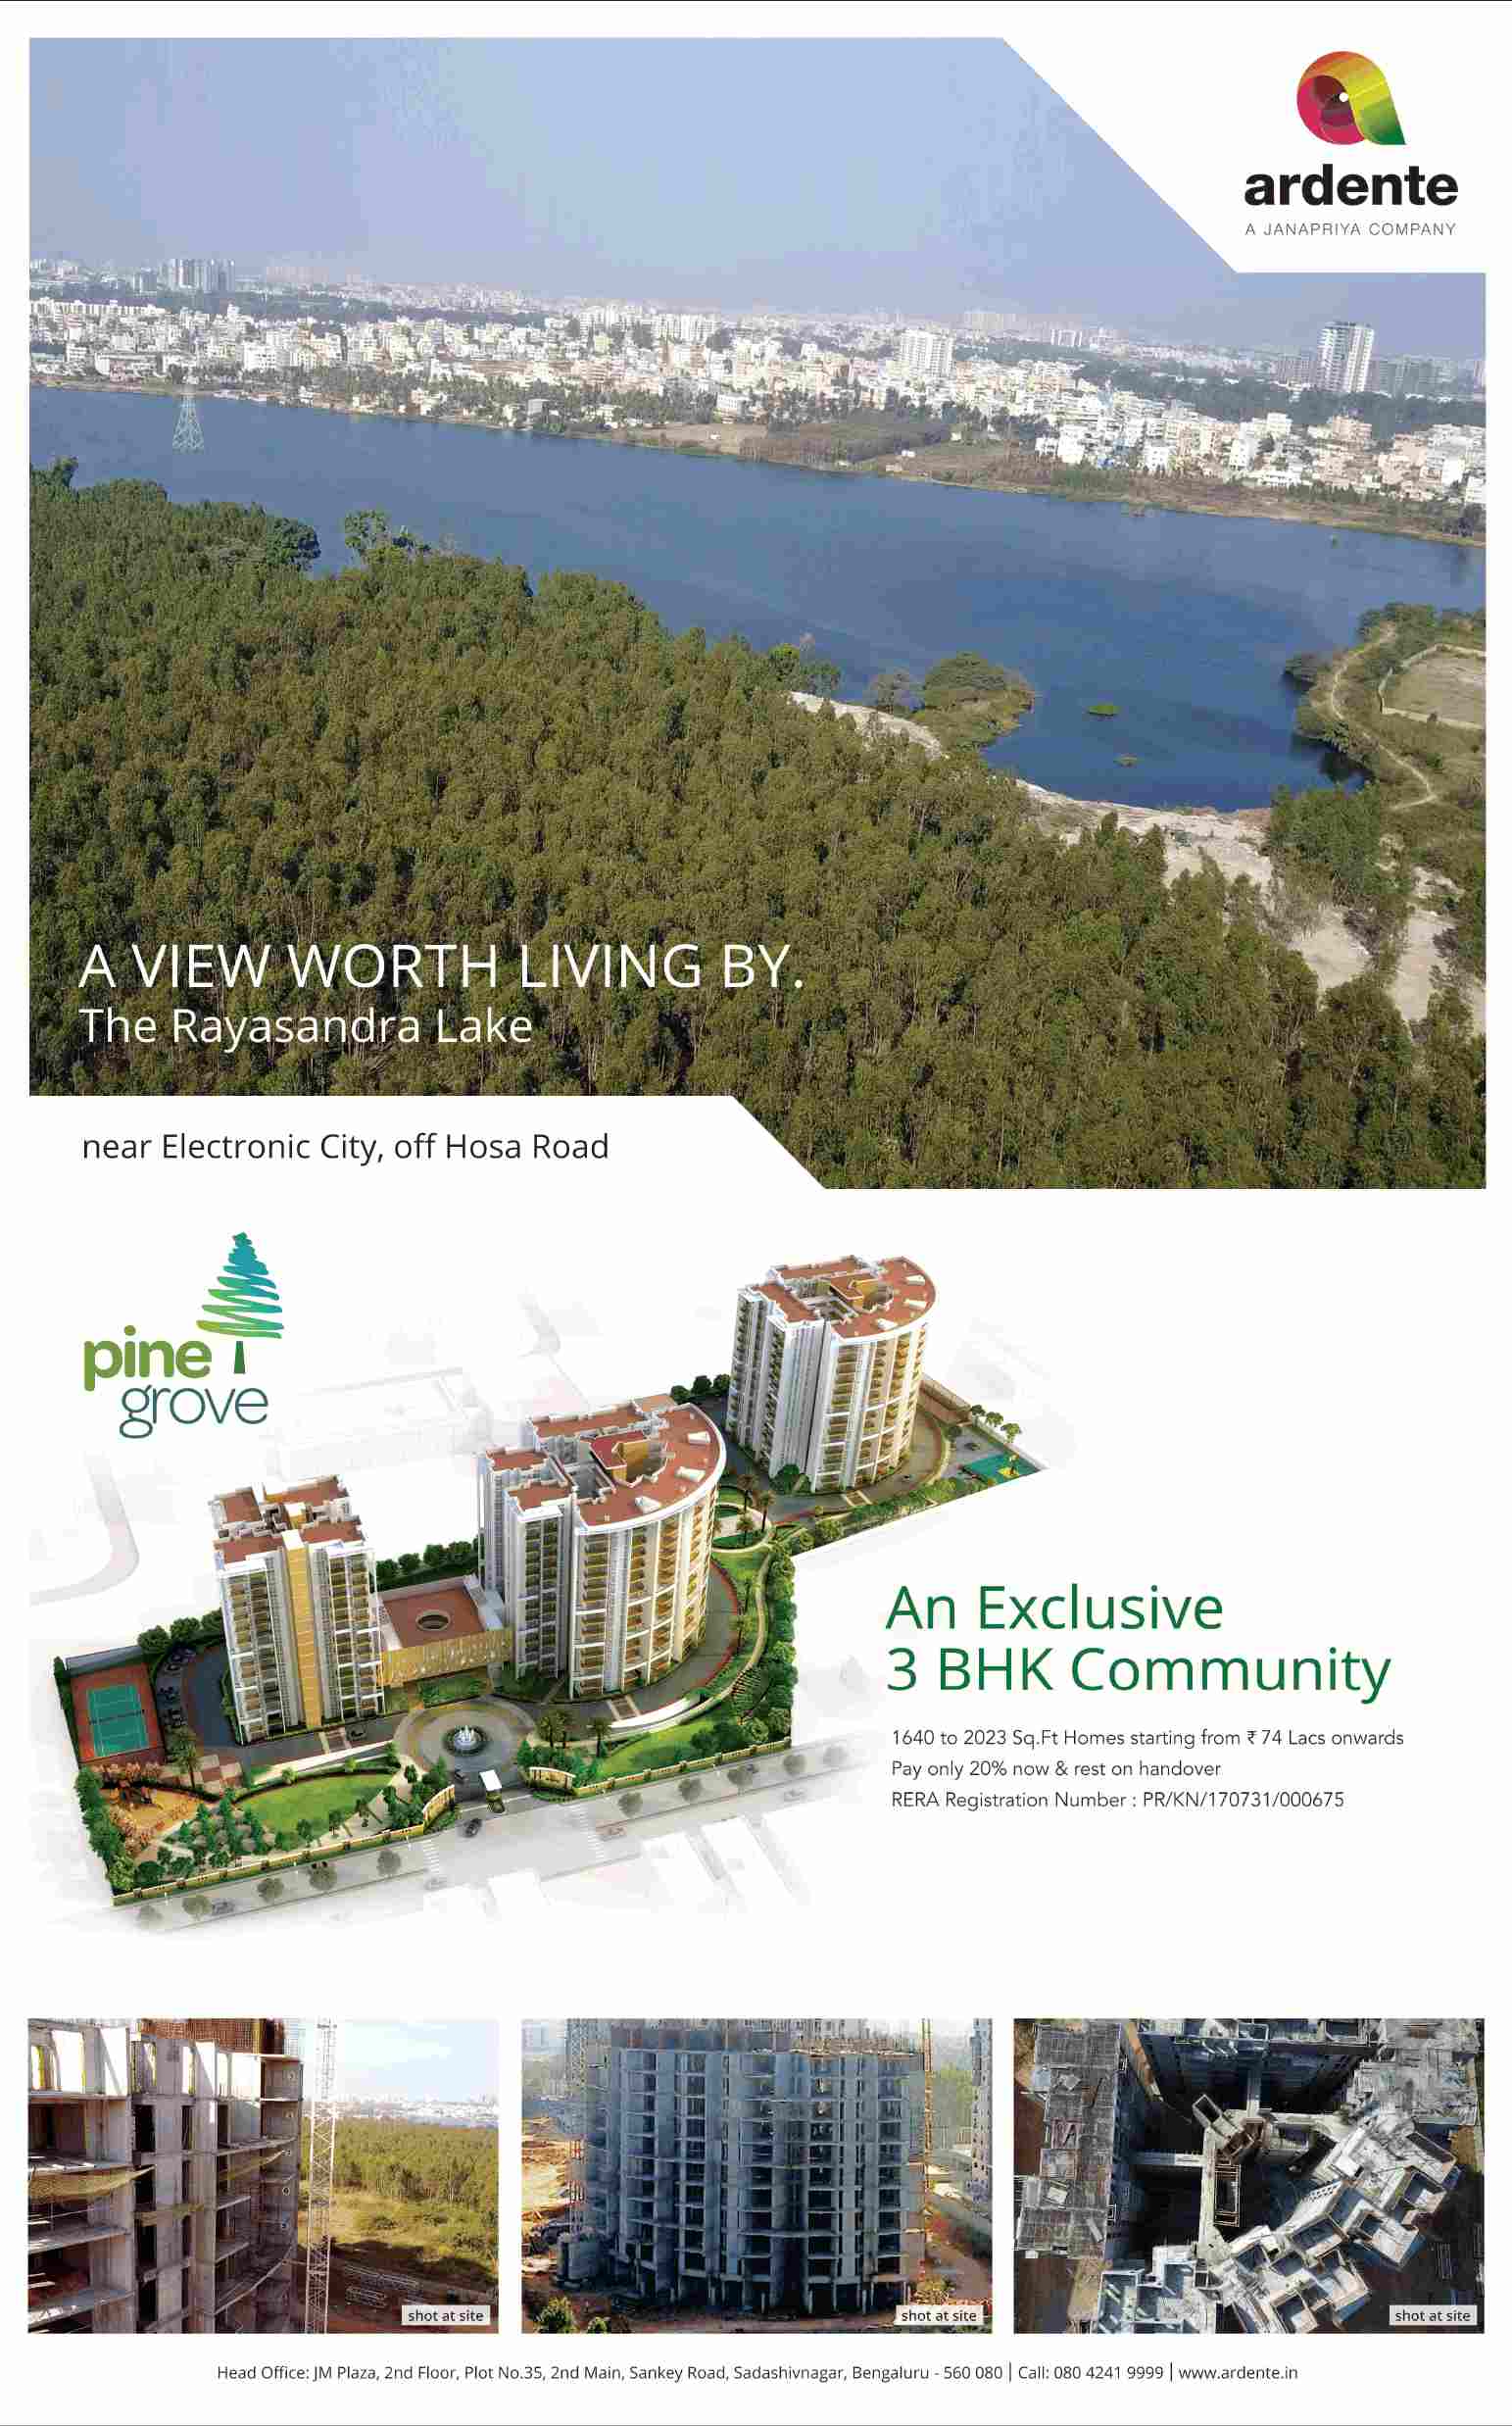 Pay only 20% now and rest on handover at Ardente Pine Grove in Bangalore